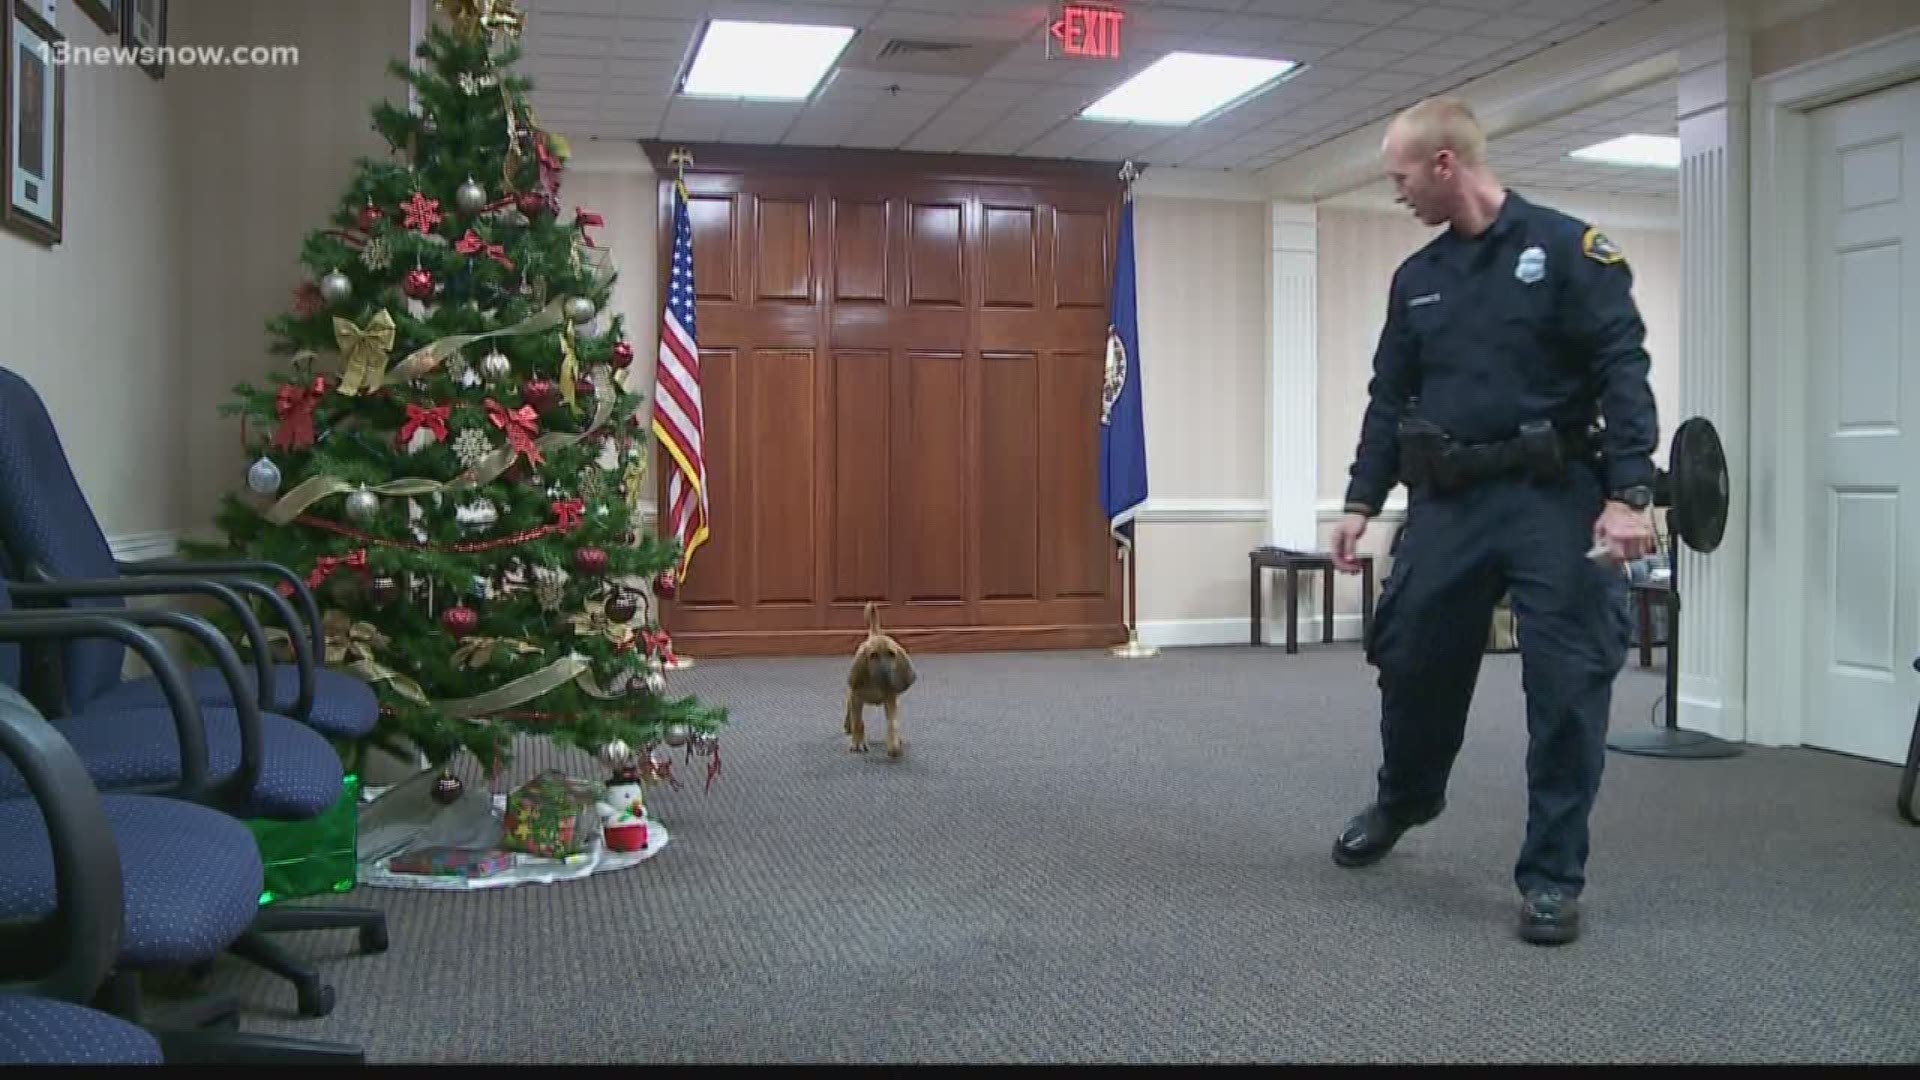 The newest Portsmouth police officer has a name, Duke!